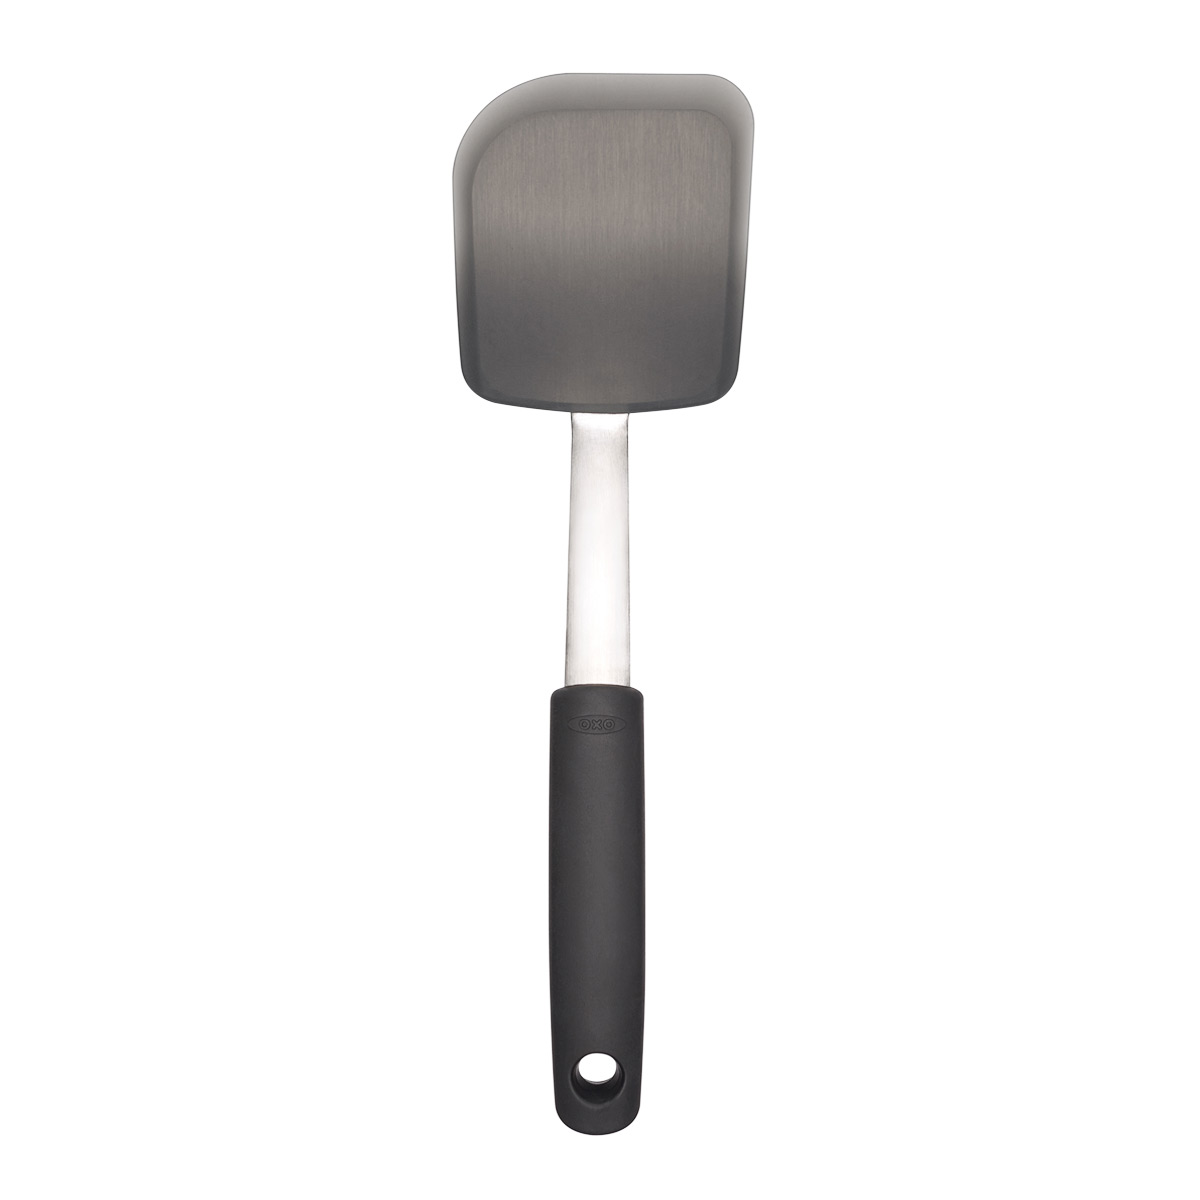 https://www.containerstore.com/catalogimages/347509/10076045-OXO-Cookie-Spatula-VEN2.jpg